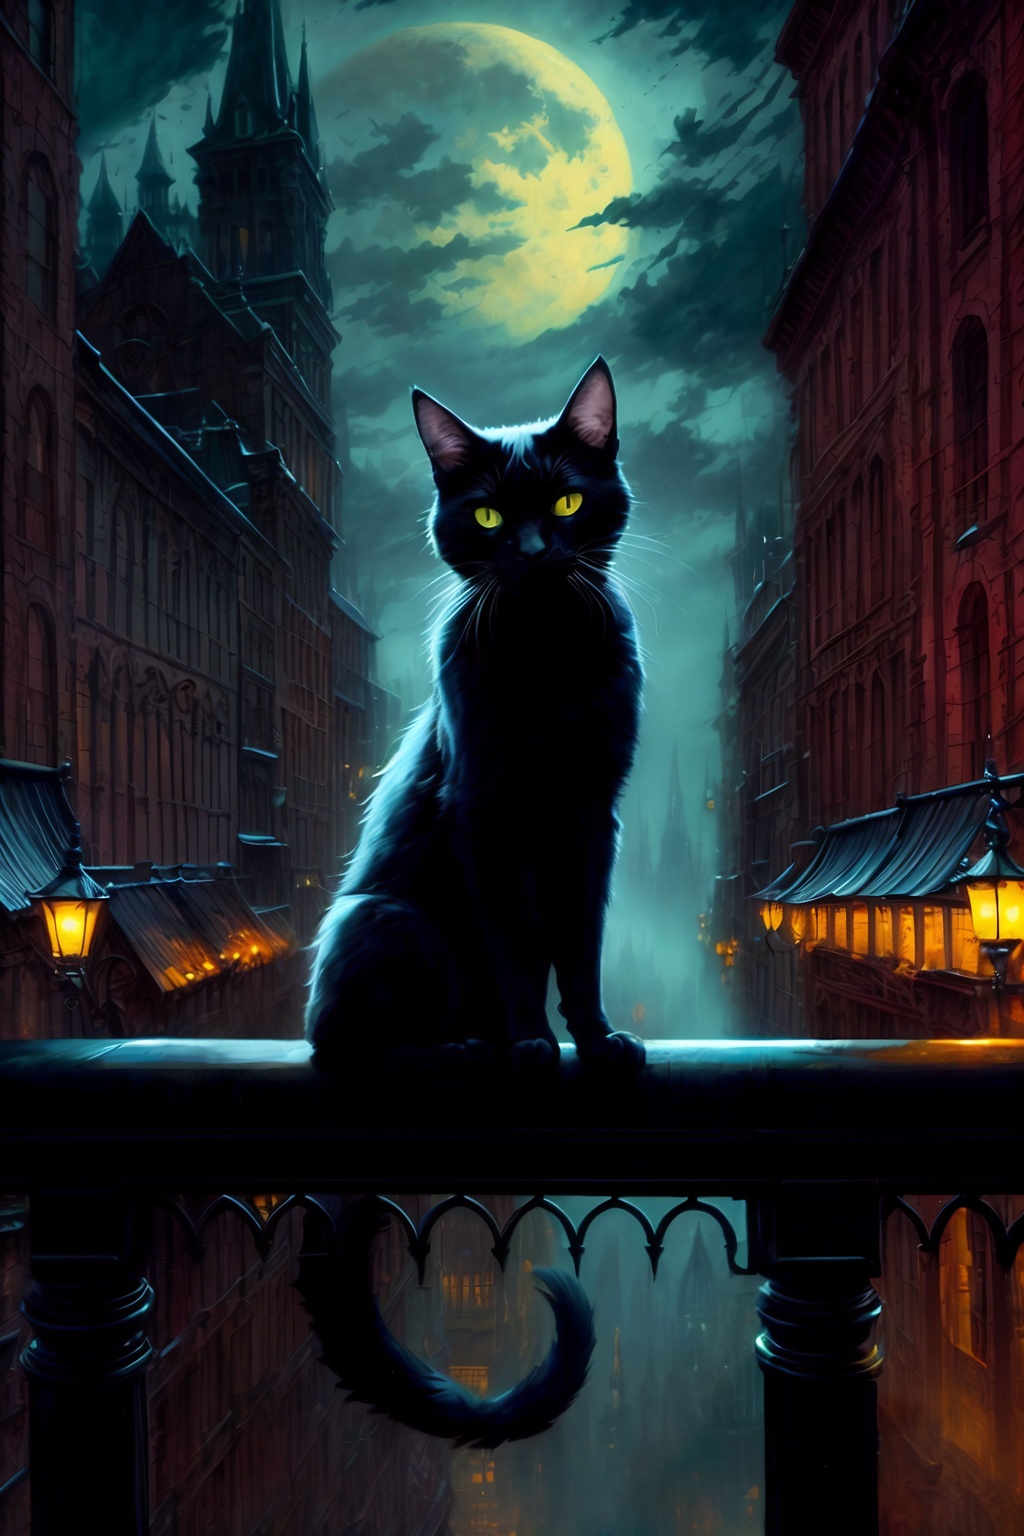 Prompt: black cat in noir concept splash art character ((by Aleksi Briclot)), ((by Guillermo del Toro)), ((by Bastien L. Deharme)), ((by Antonio J. Manzanedo)), ((by Jesper Ejsing)), ((by John Atkinson Grimshaw)), ((high-quality)) ((high-detail)) ((highly-detailed)) ((exquisite)) ((minute detail)), ((photorealistic)), ((4k UHD Wallpaper)), ((breathtaking)) ((masterpiece)) close-up full-body, perched atop railing with tail dangling over the edge, overlooking the street below, tall buildings, ancient architecture, dangerous heights.